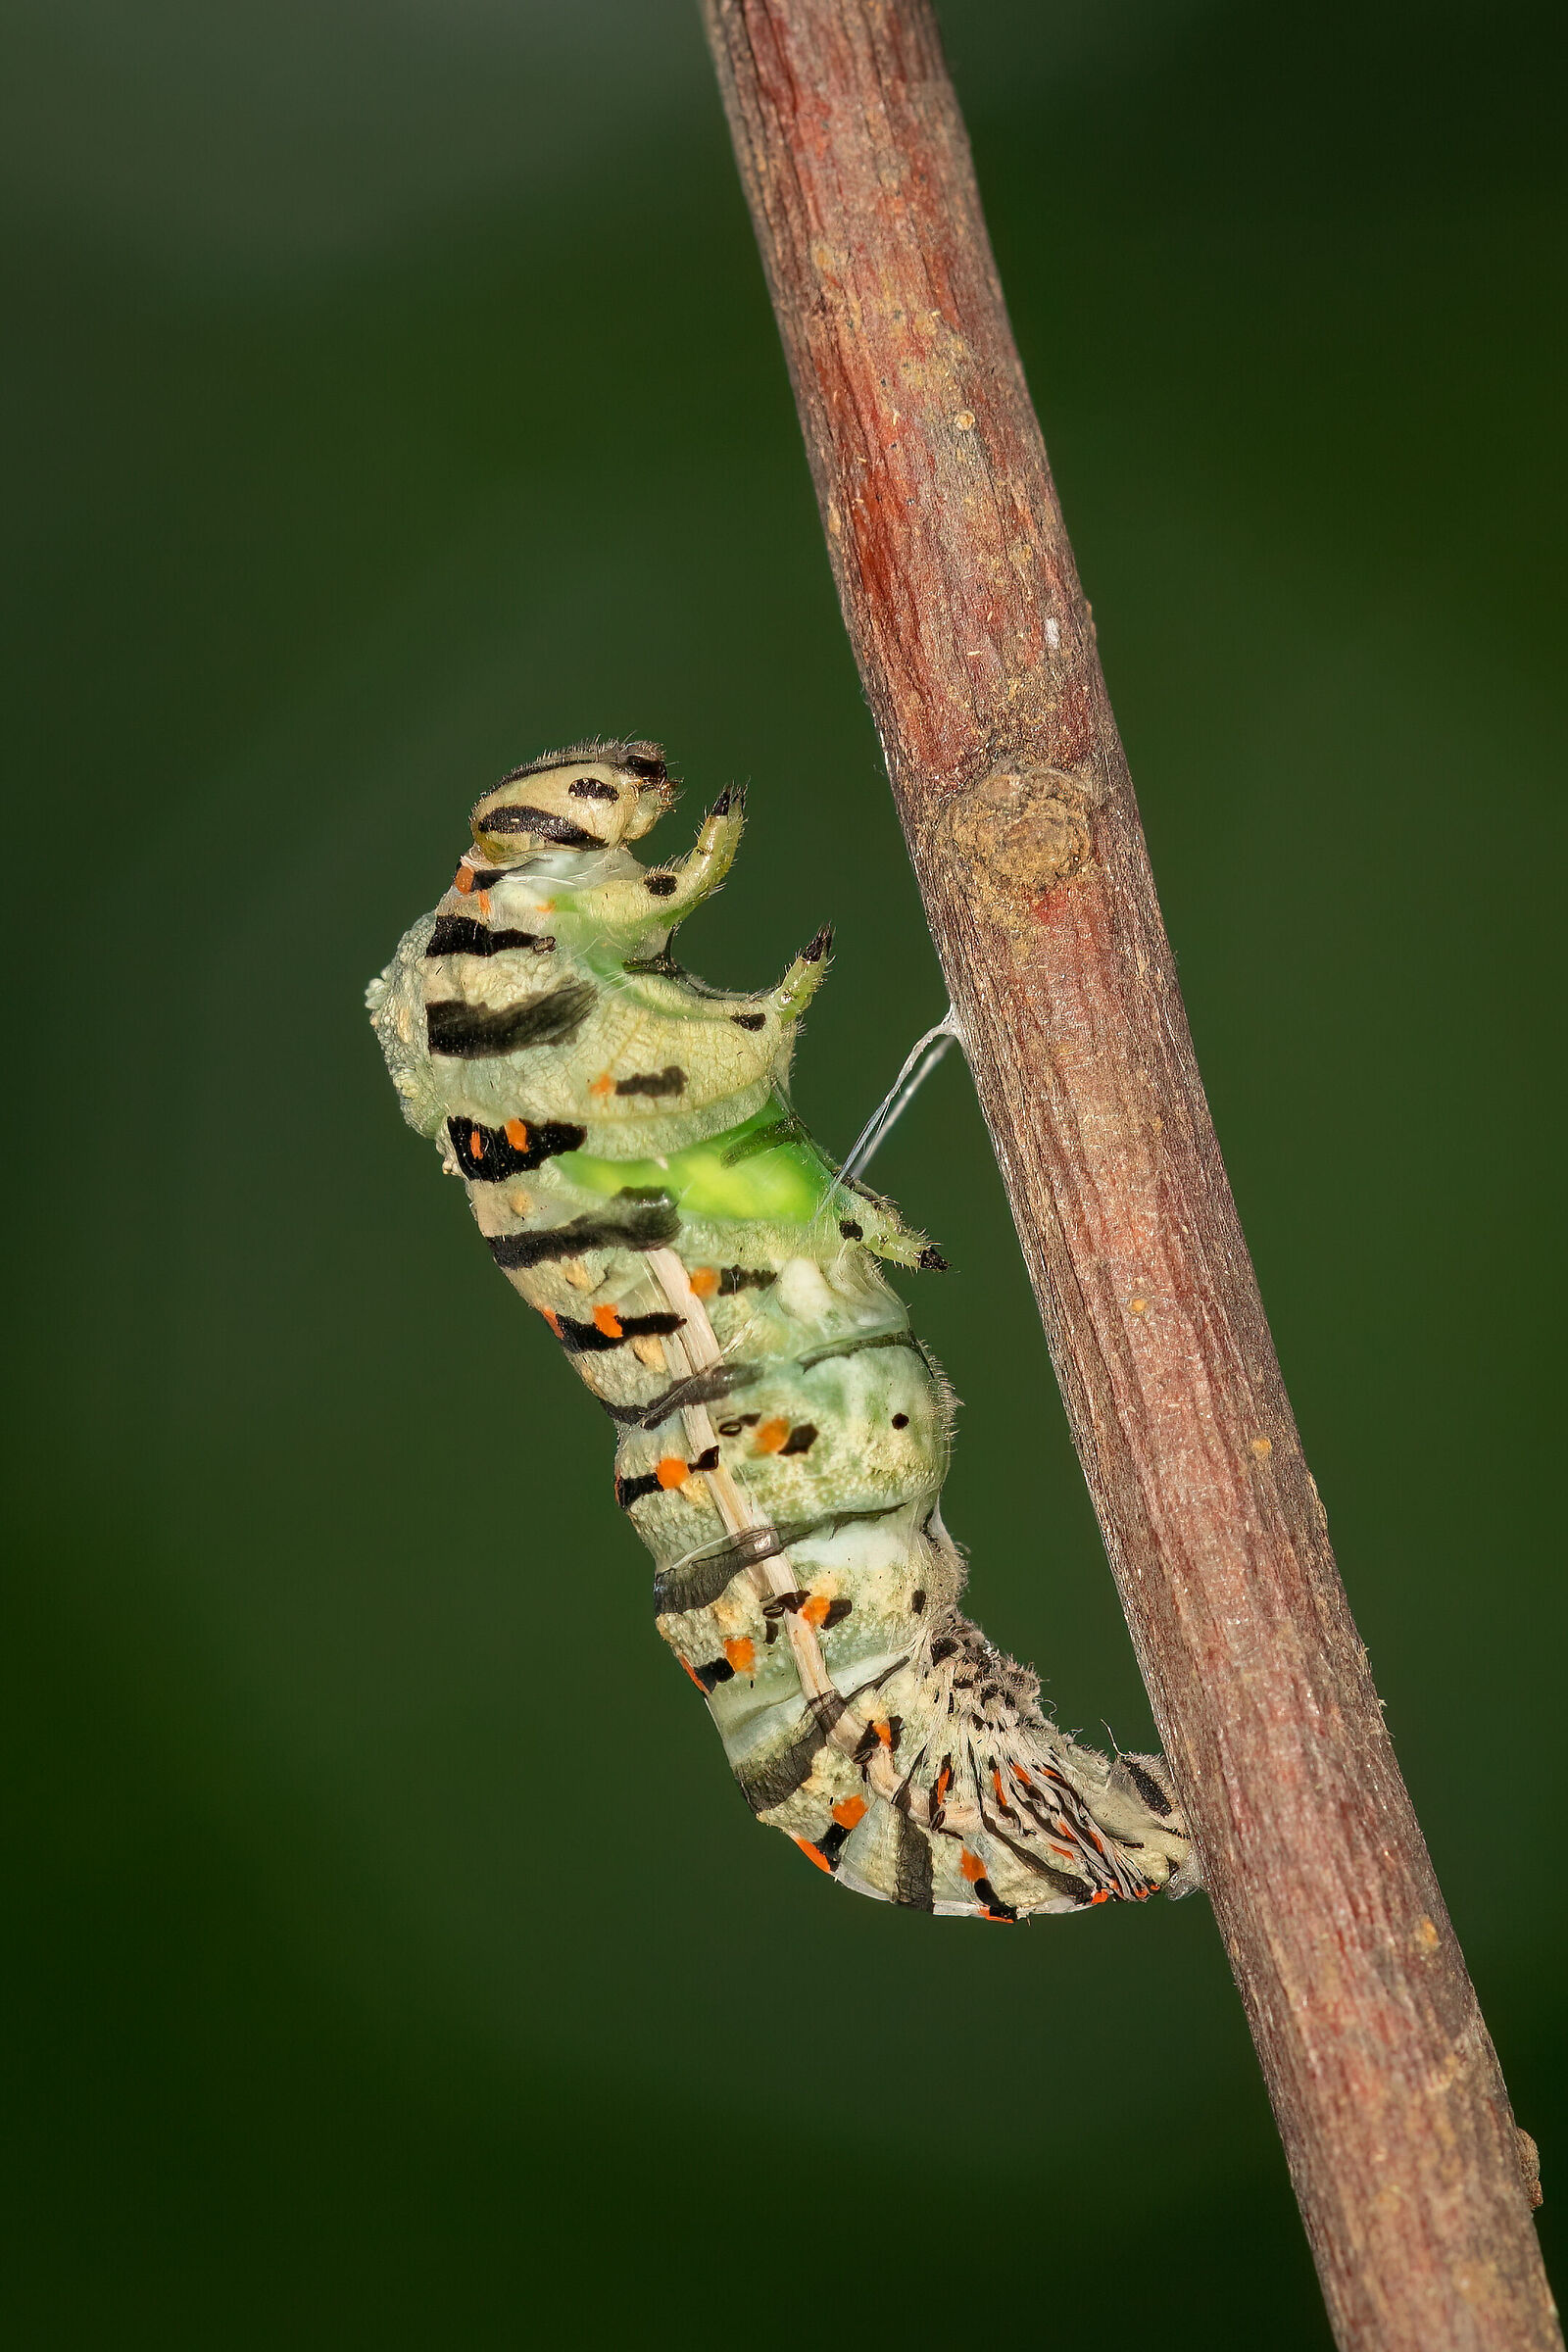 The last molt of the swallowtail: the rupture of the cuticle...